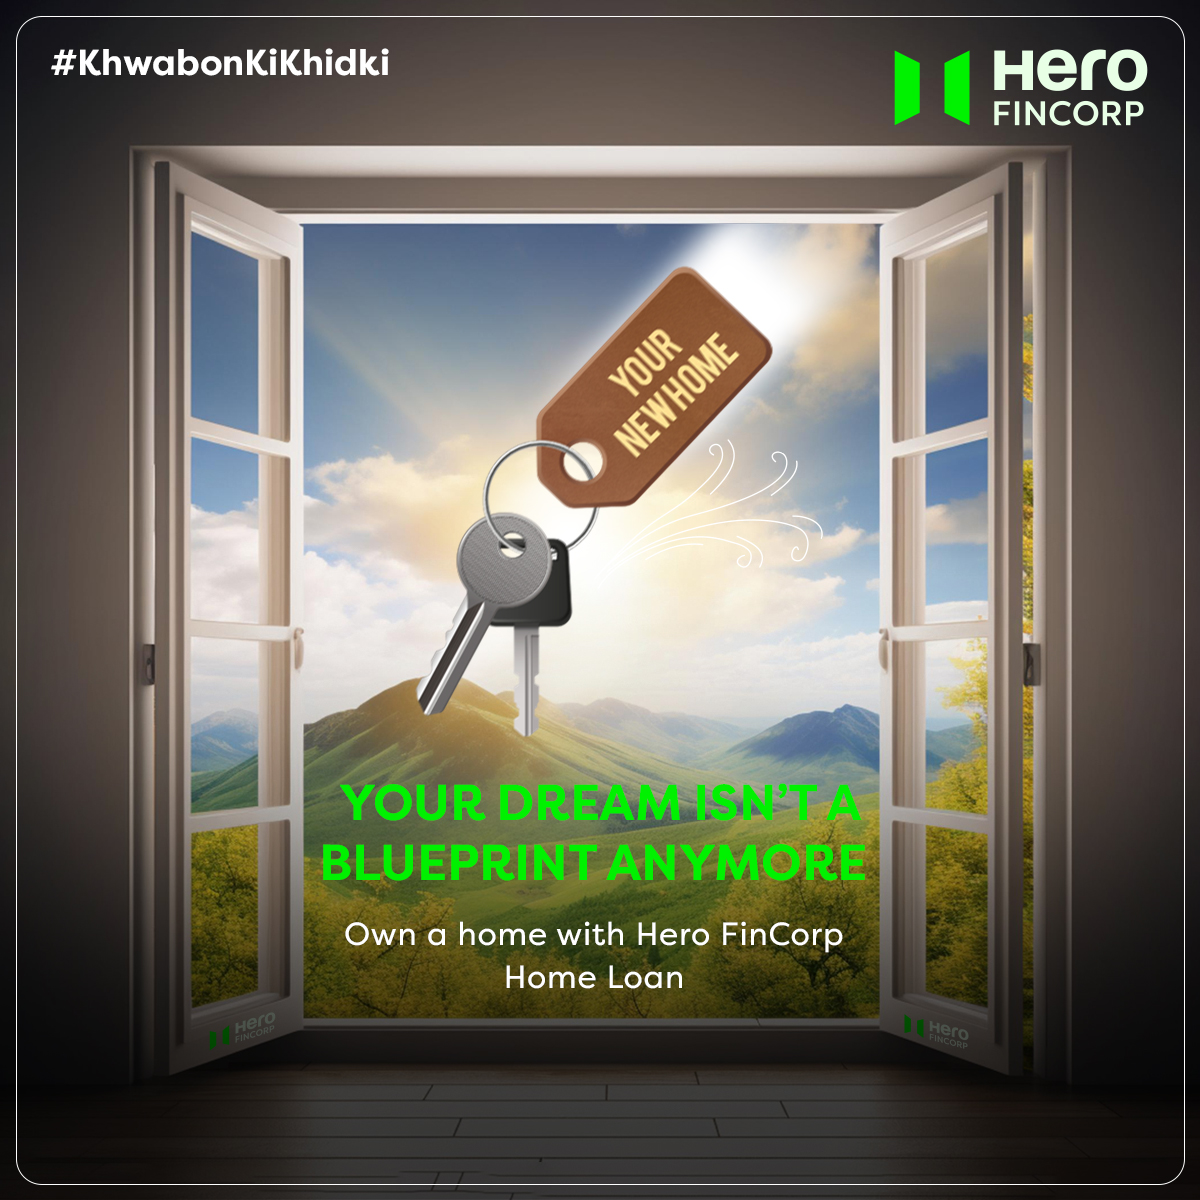 Hero FinCorp: Where home dreams find a perfect address. Start your journey with our Home Loan today. 

#HeroFinCorp #KhwabonKiKhidki #NewHome #HomeLoan #HousingFinance